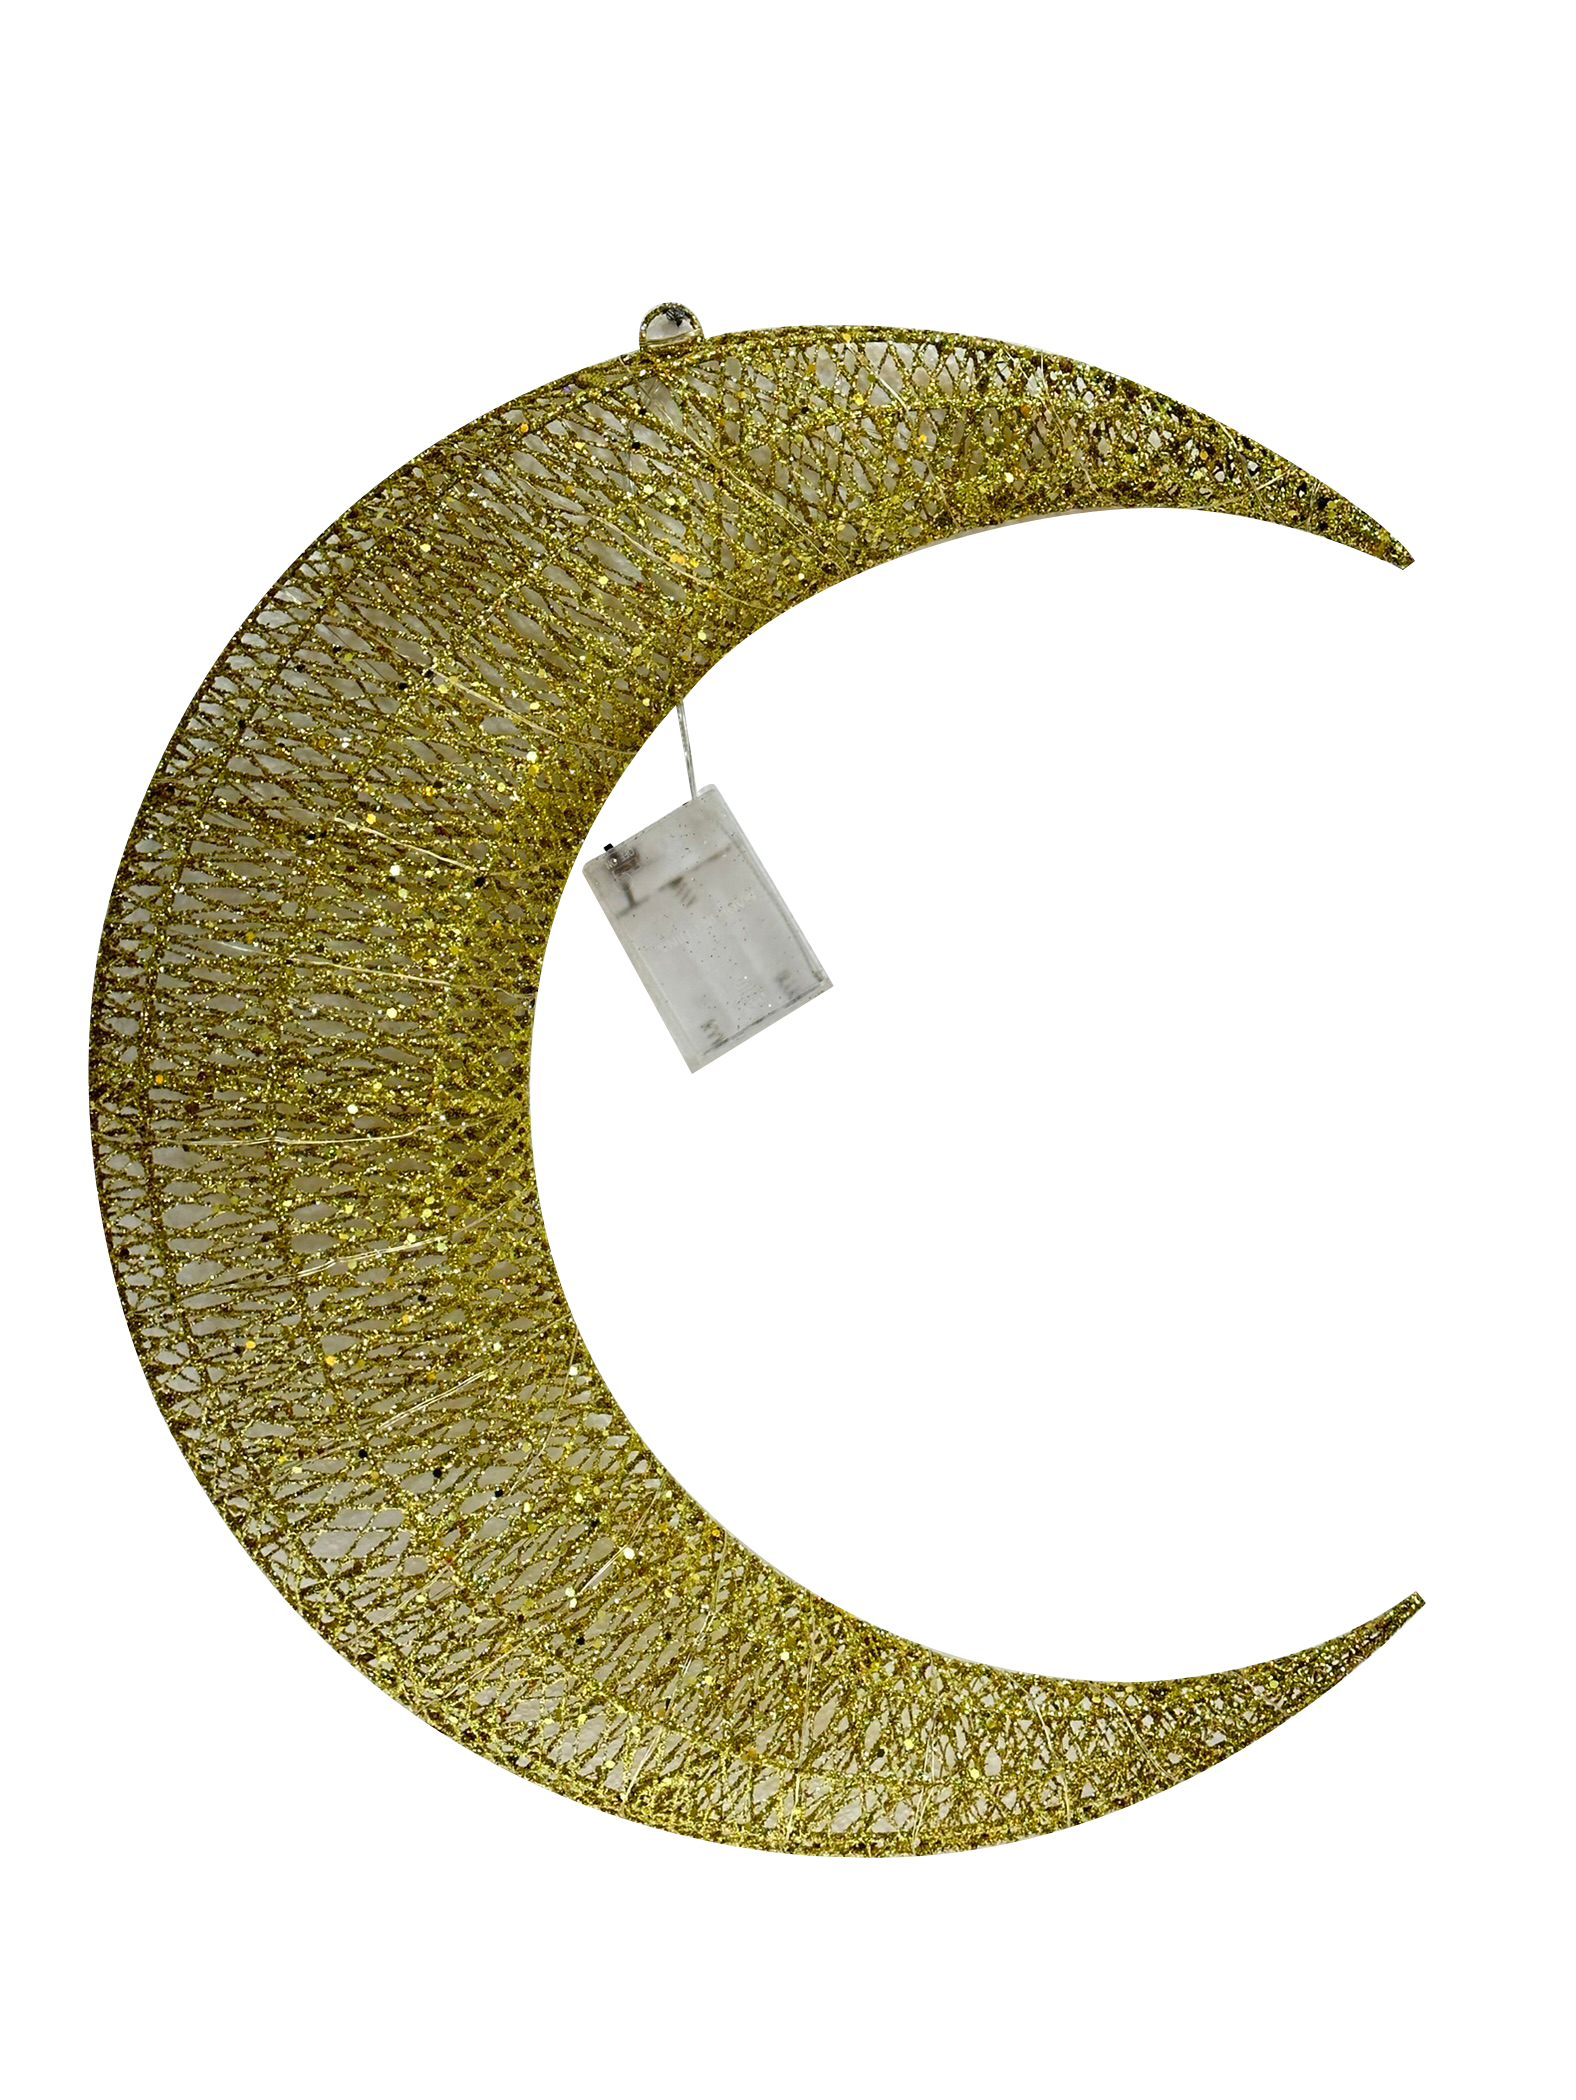 Handcrafted Rattan Moon Wall Decor - Sunset Gifts Store